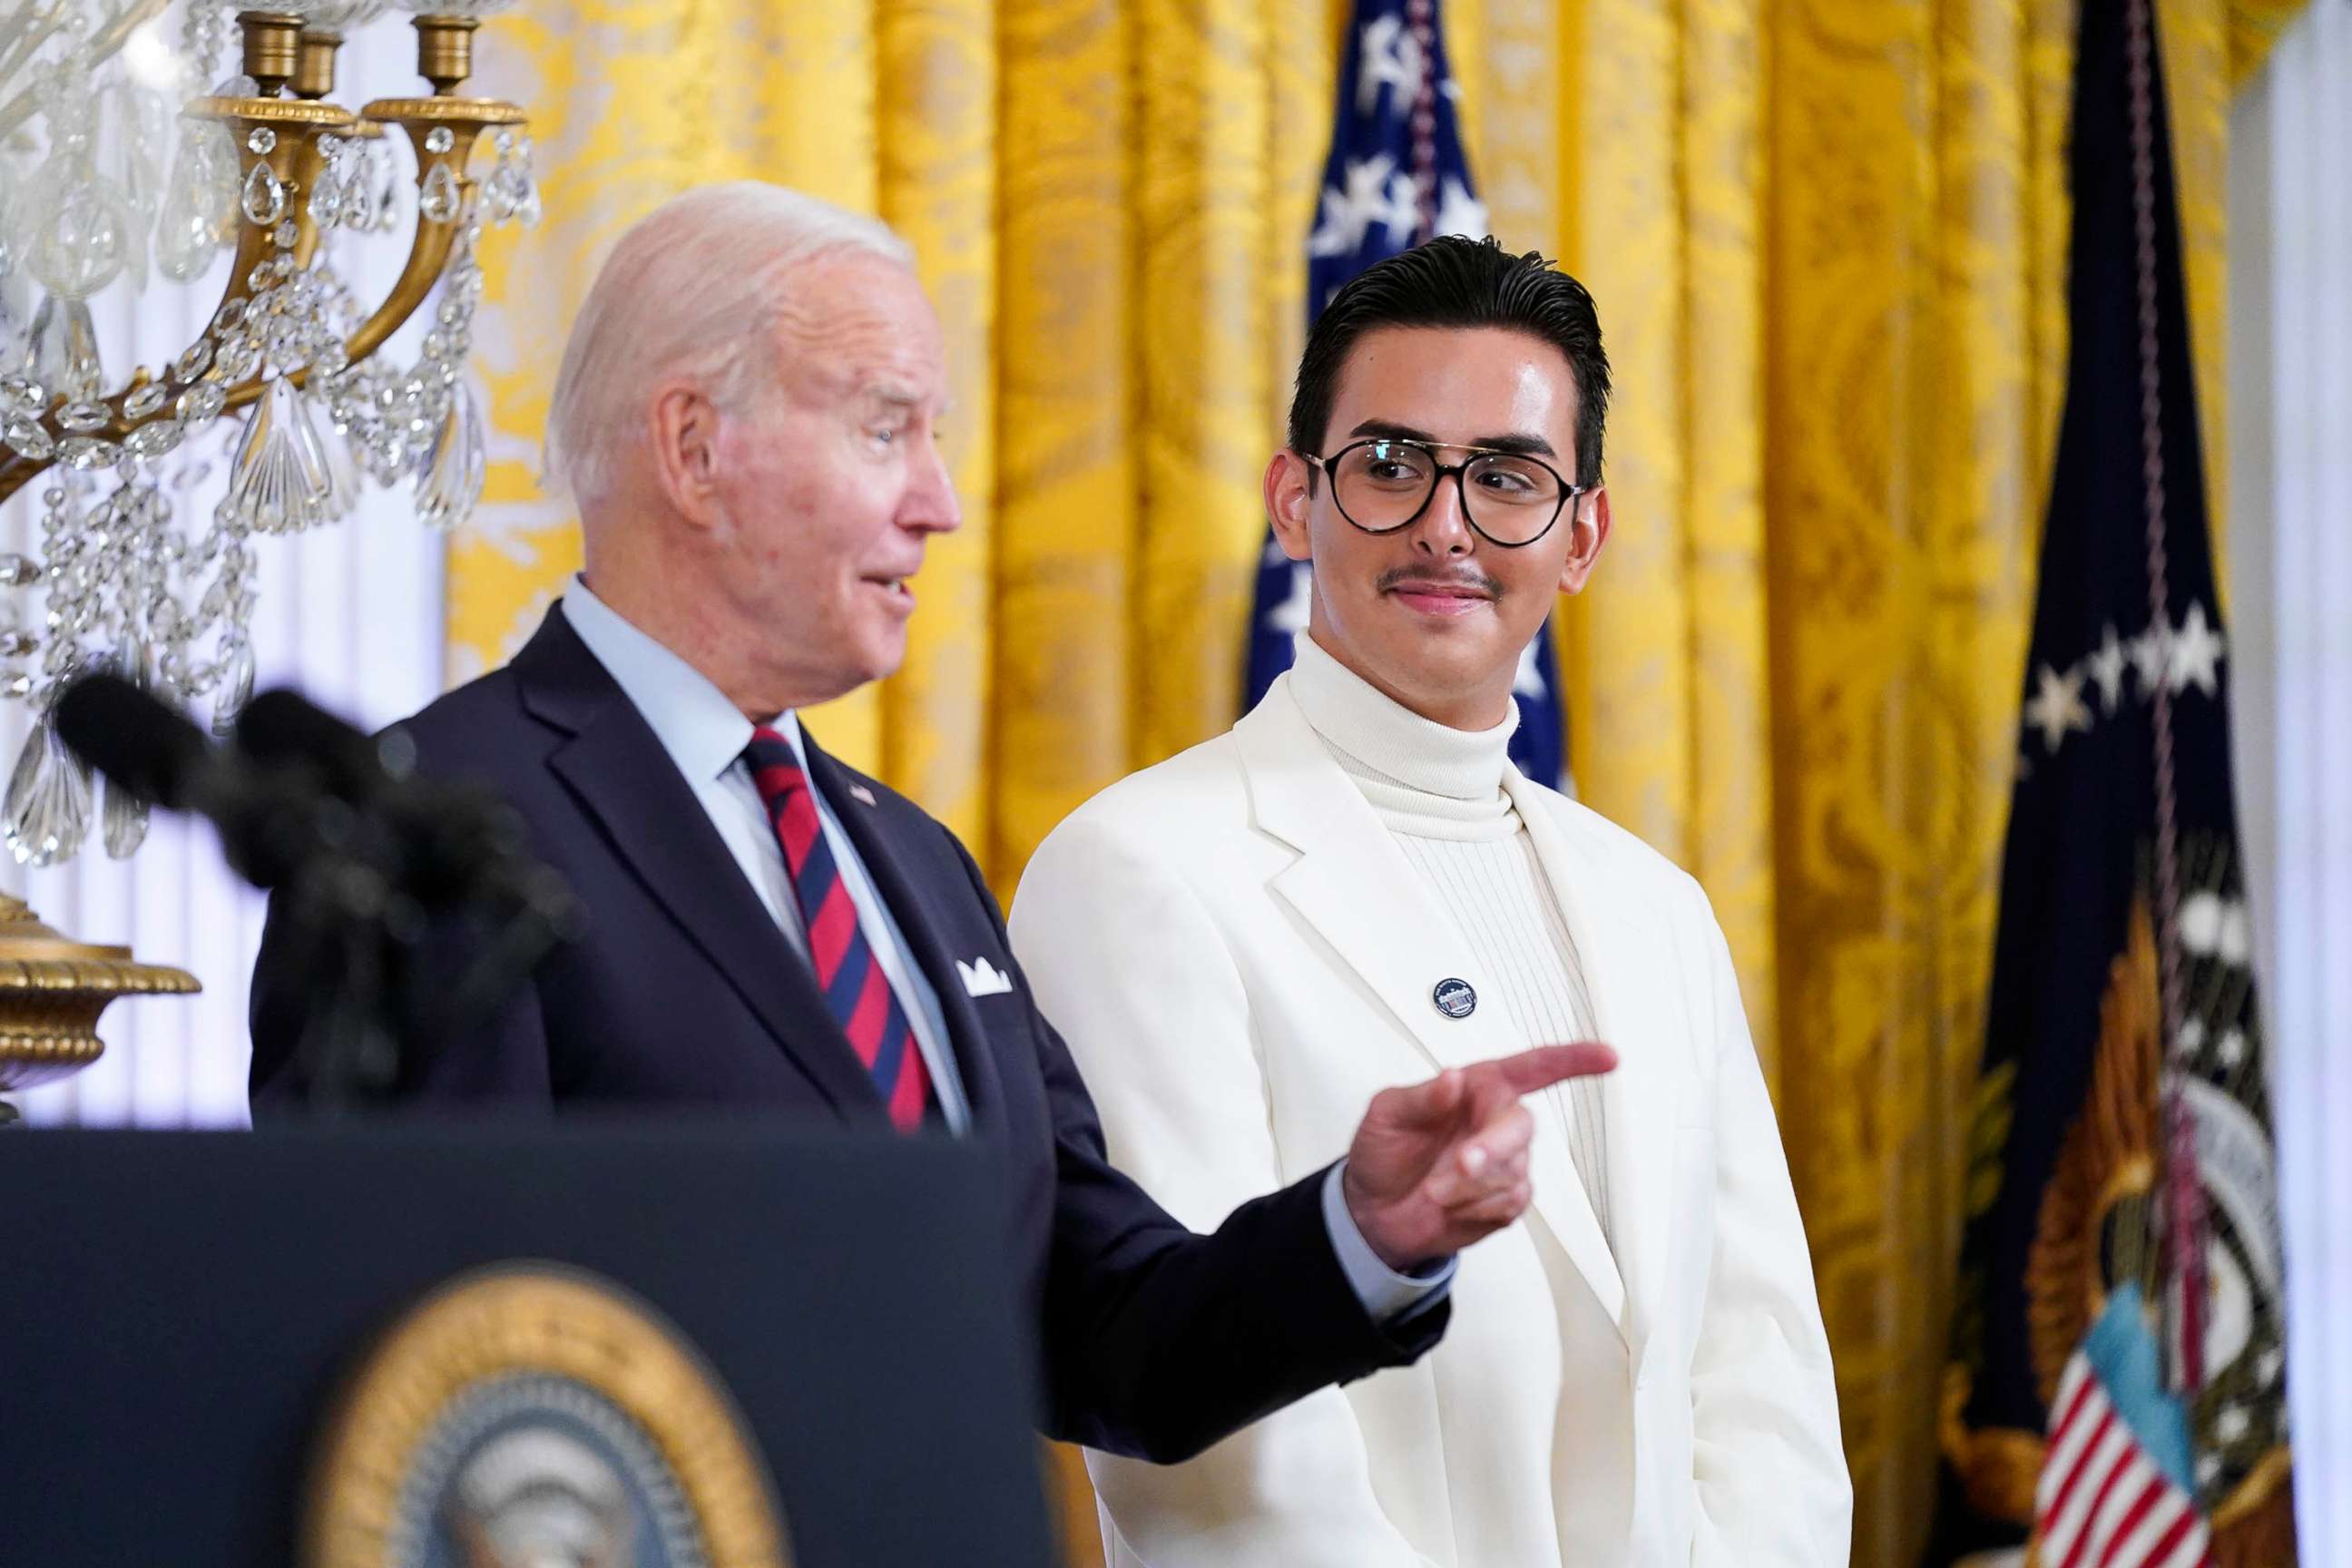 PHOTO: President Joe Biden speaks next to youth activist Javier Gomez at an event to celebrate Pride Month in the East Room of the White House in Wasington, June 15, 2022.